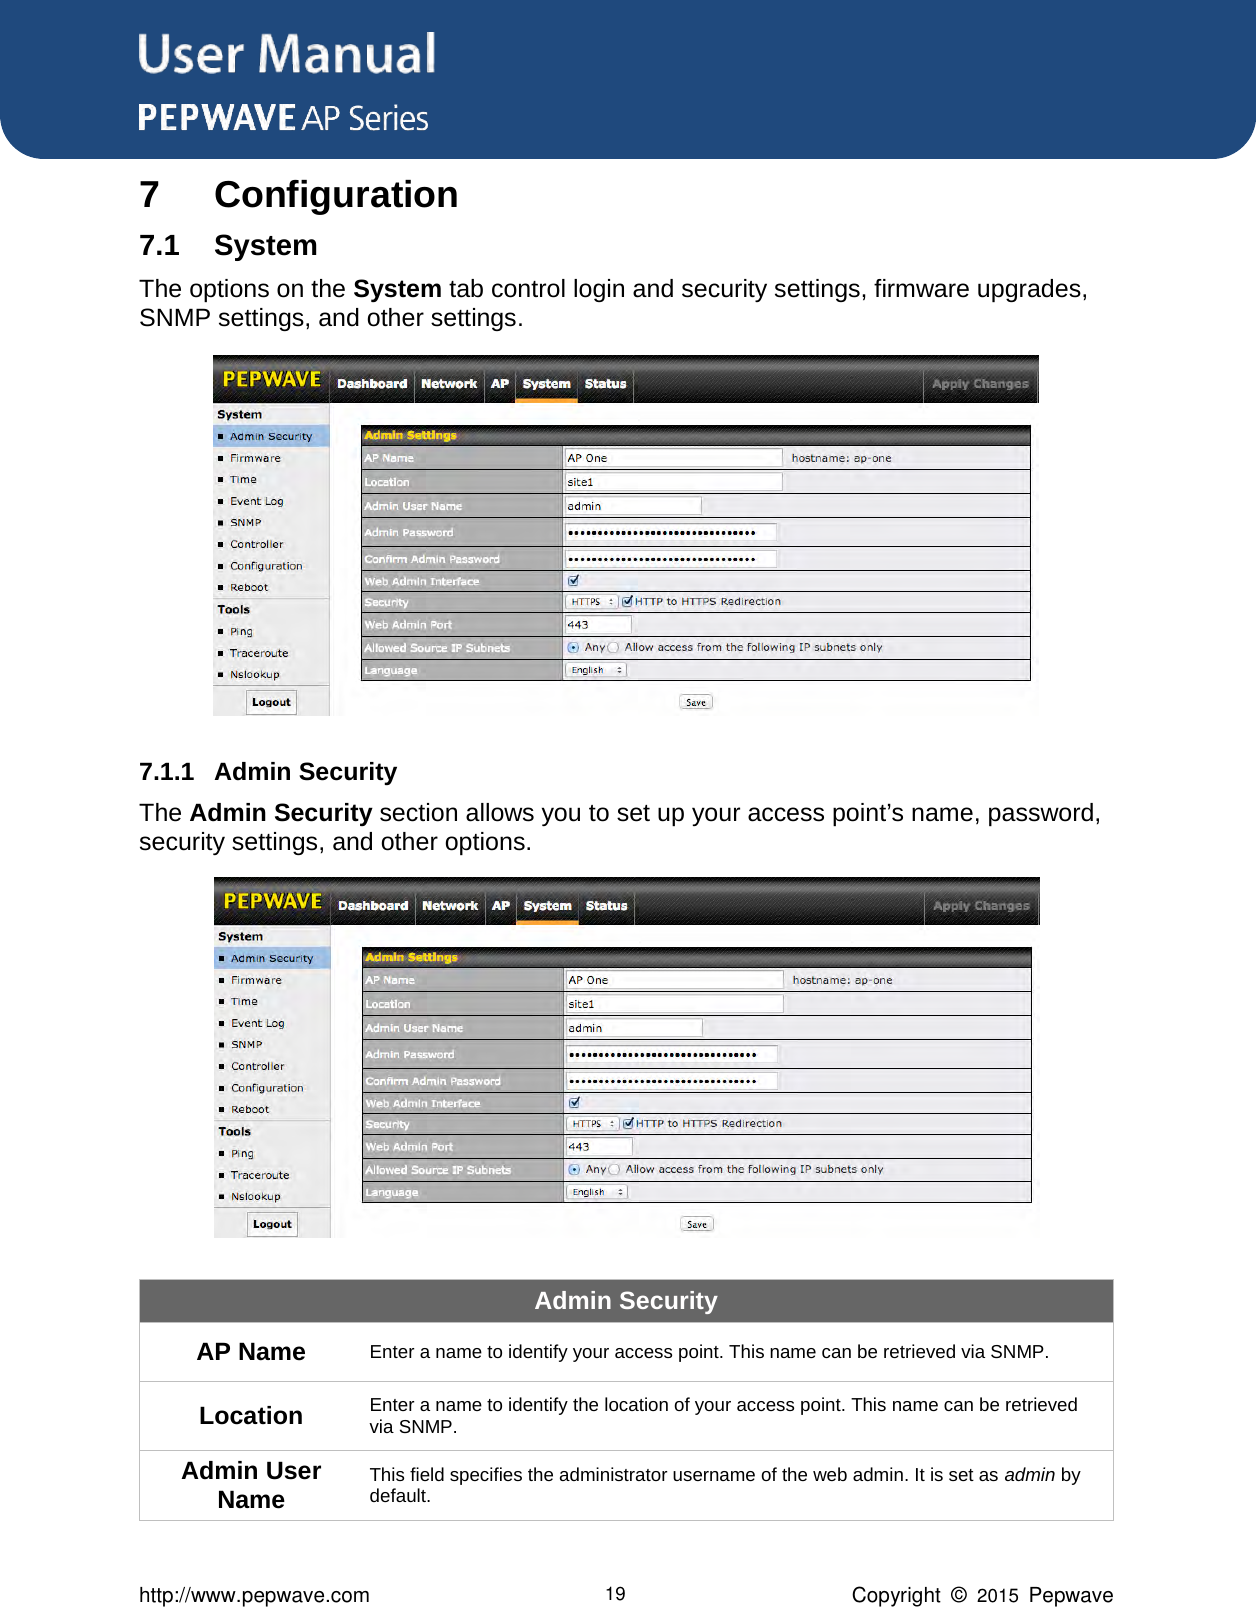 User Manual      http://www.pepwave.com 19 Copyright  ©  2015  Pepwave 7 Configuration 7.1 System The options on the System tab control login and security settings, firmware upgrades, SNMP settings, and other settings.  7.1.1 Admin Security The Admin Security section allows you to set up your access point’s name, password, security settings, and other options.  Admin Security AP Name Enter a name to identify your access point. This name can be retrieved via SNMP. Location Enter a name to identify the location of your access point. This name can be retrieved via SNMP. Admin User Name This field specifies the administrator username of the web admin. It is set as admin by default. 